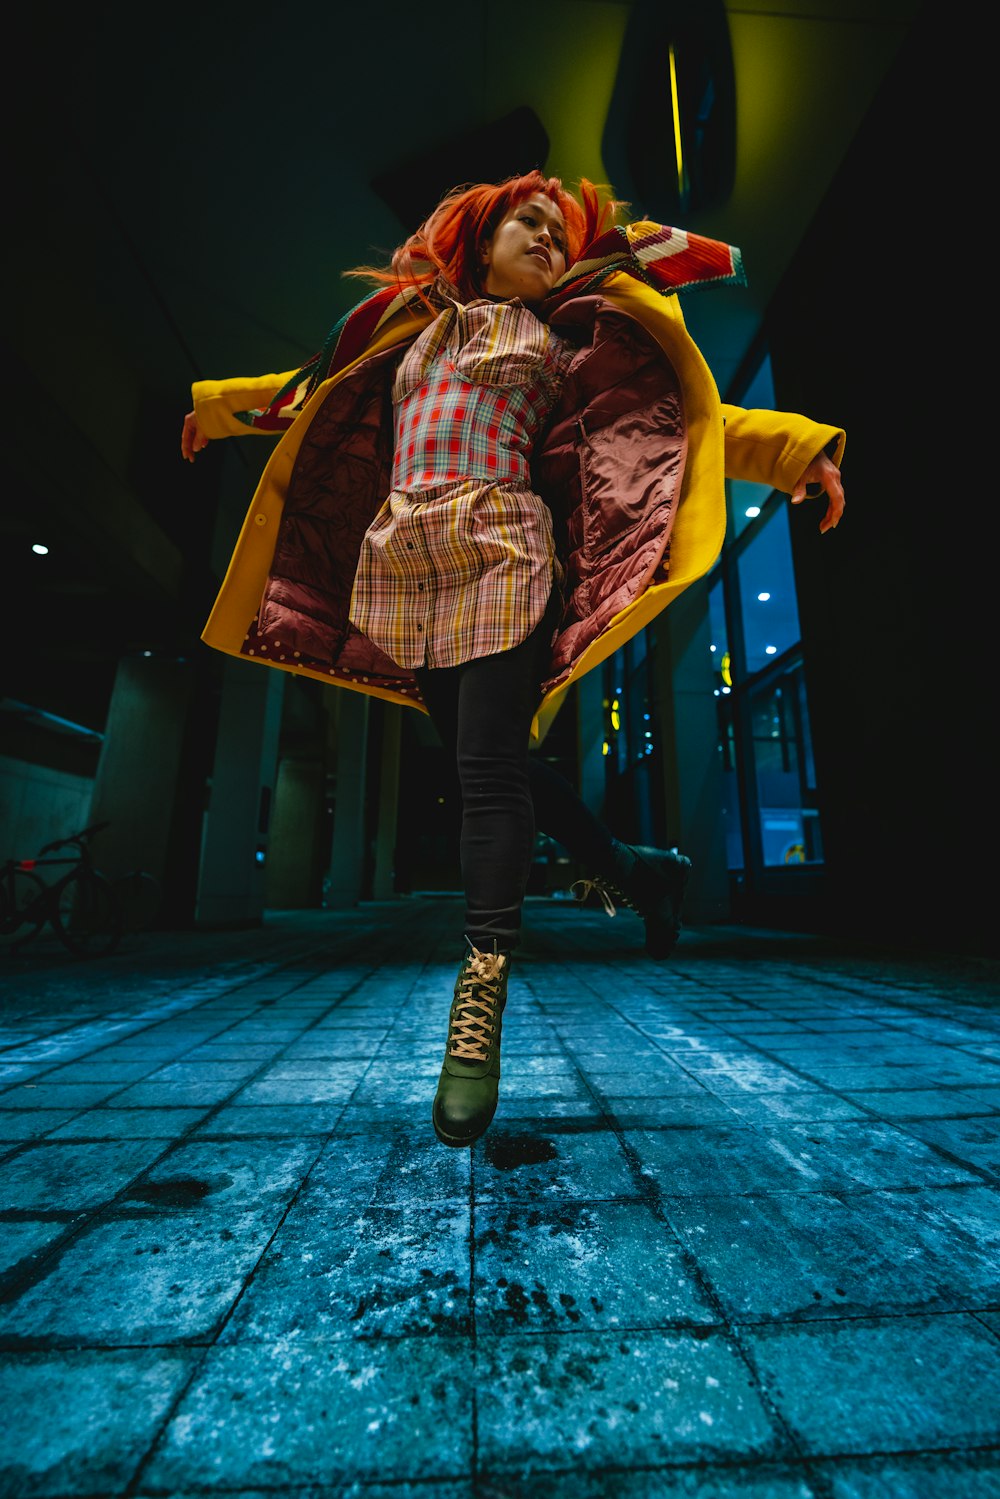 a woman in a red and yellow coat is dancing